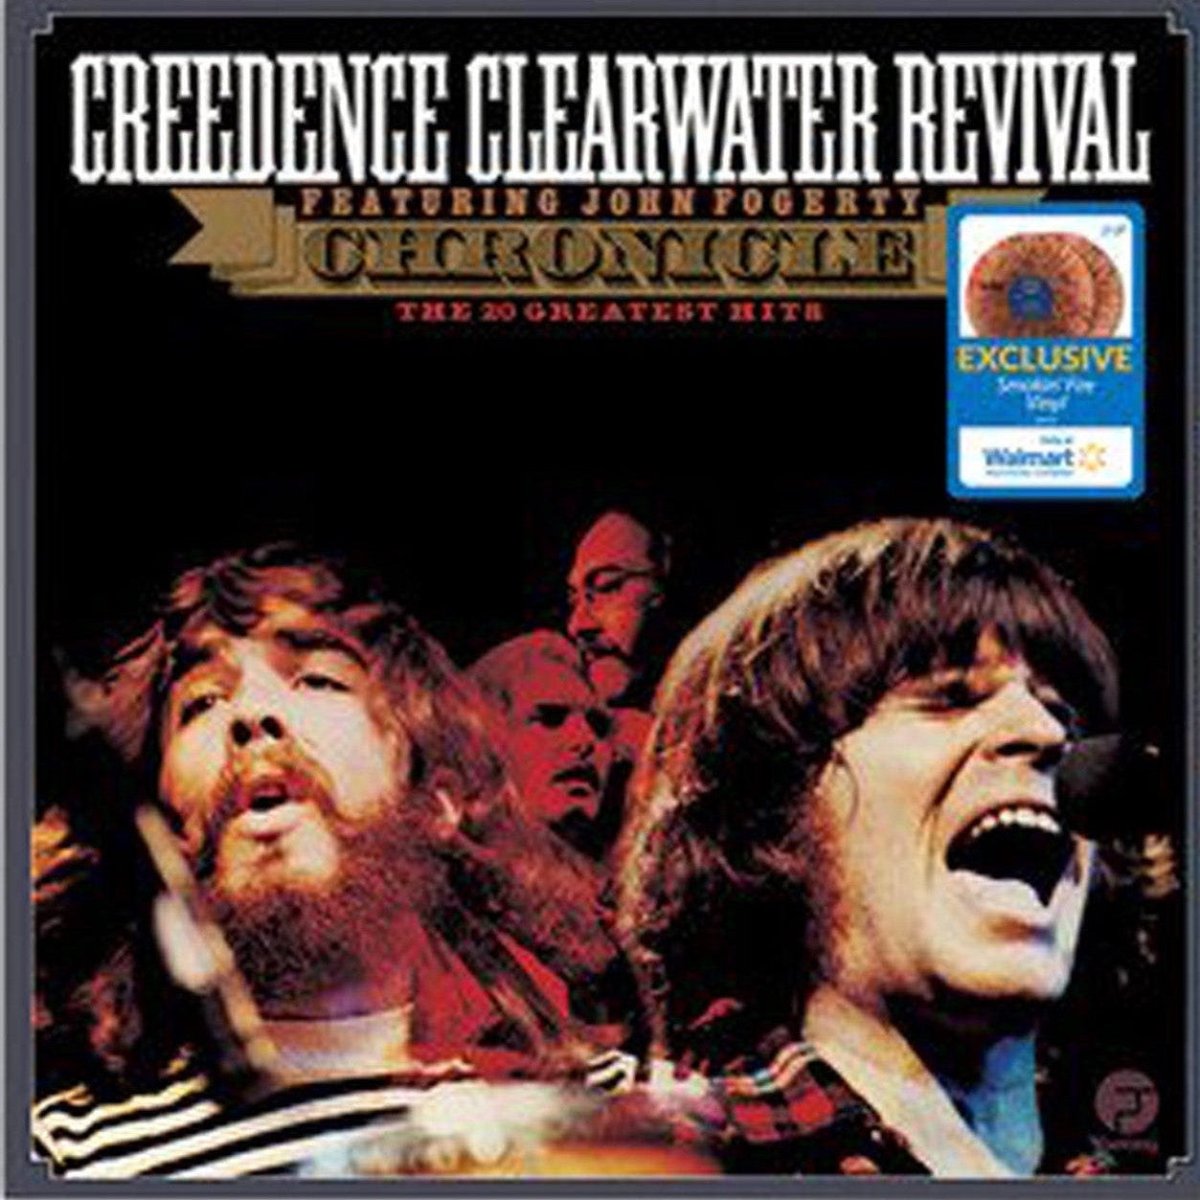 Creedence Clearwater Revival - Chronicle - The 20 Greatest Hits Vinyl